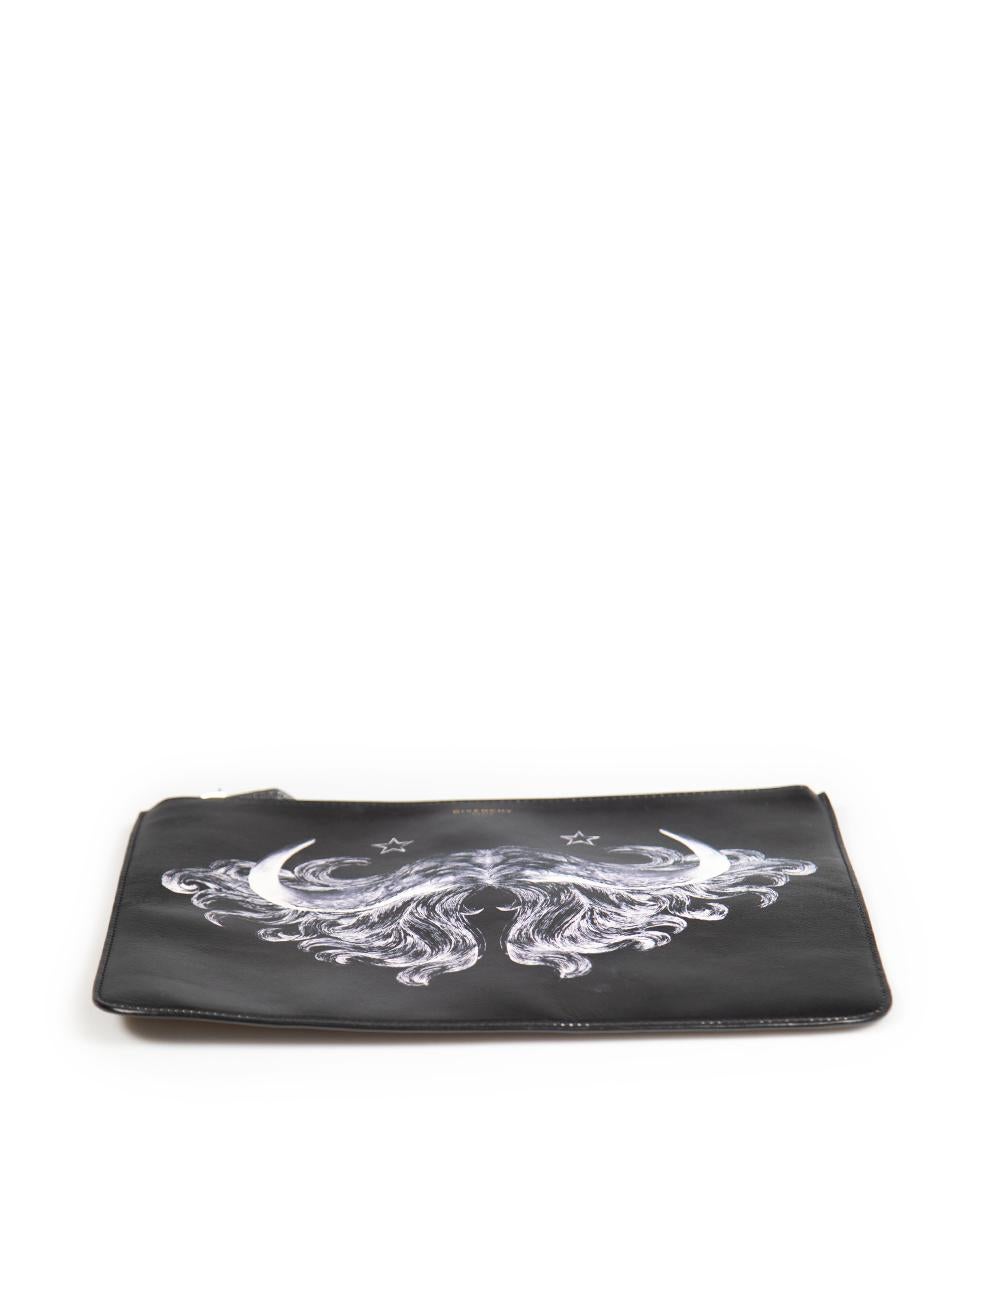 Women's Givenchy Black Leather Graphic Printed Zip Clutch For Sale